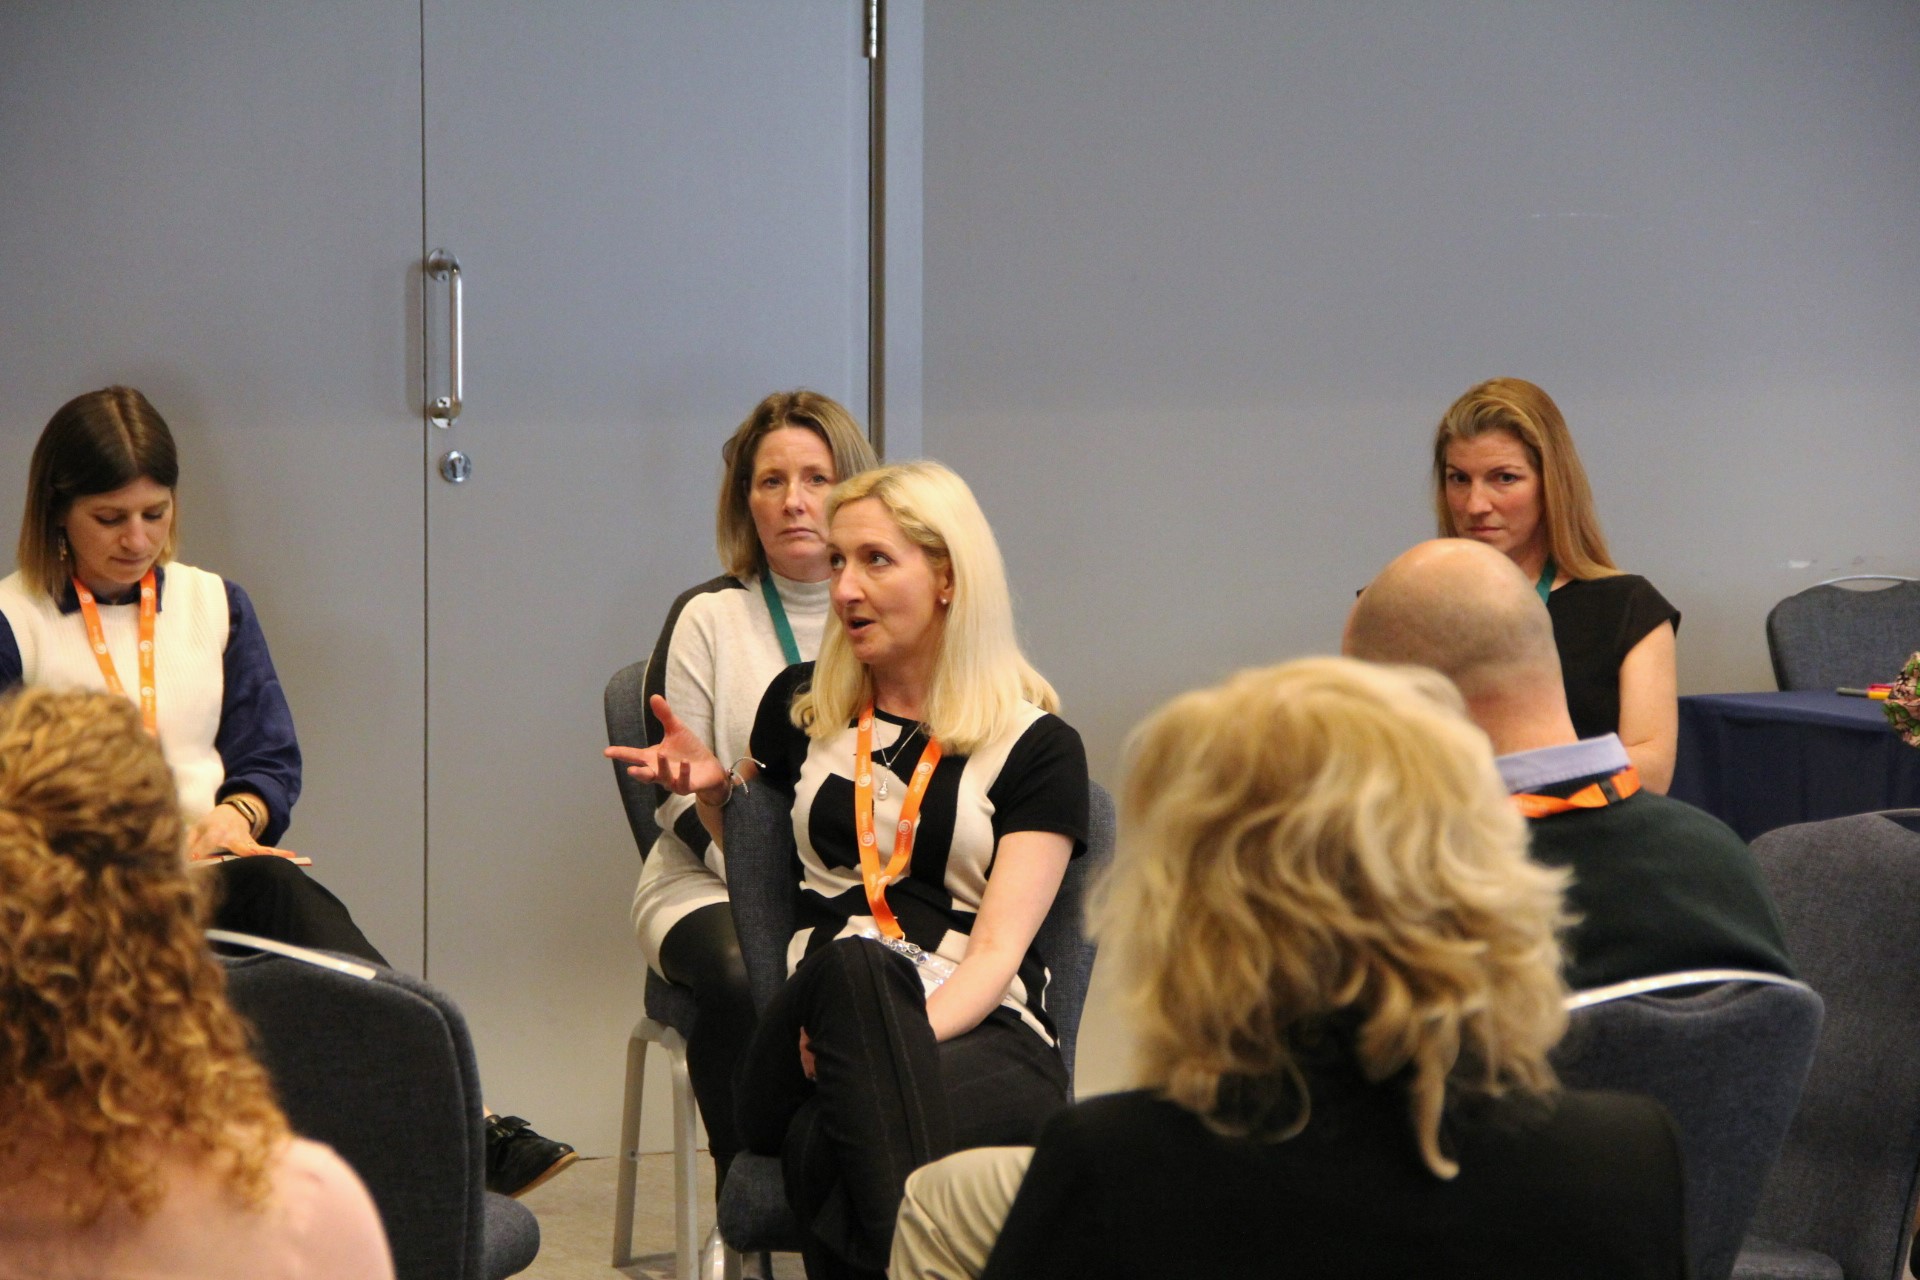 A woman, seated, asks a question of other executives, who are sat around her in a circle